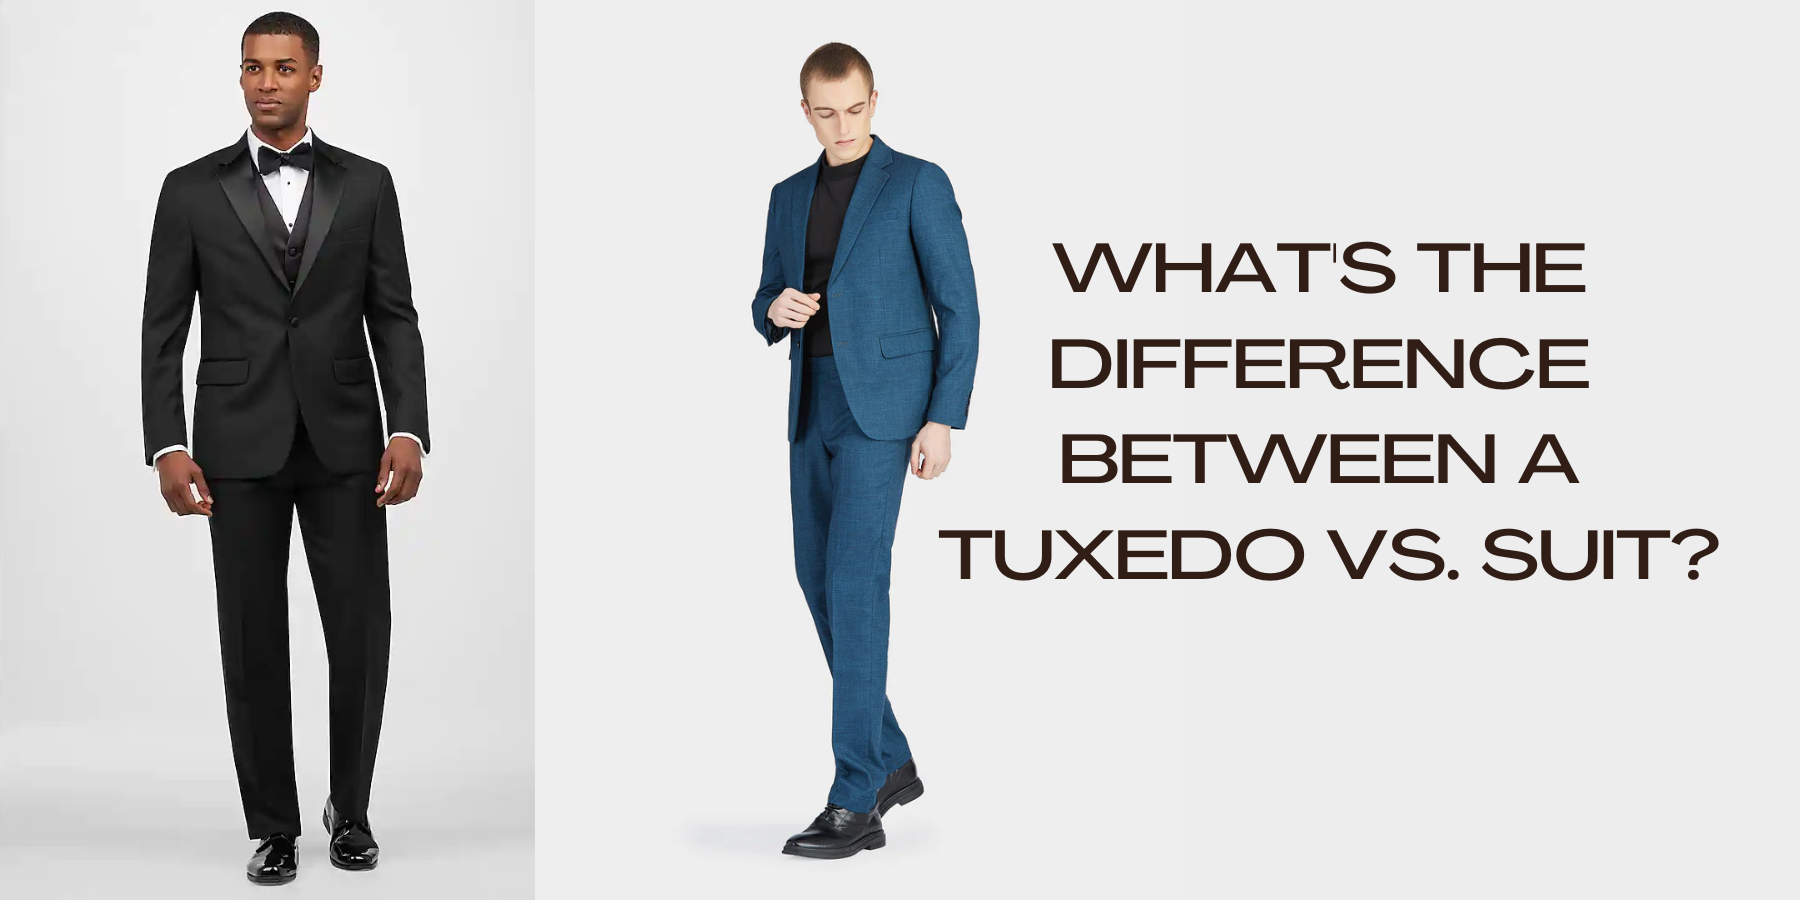 What's the Difference Between a Tuxedo vs. Suit?